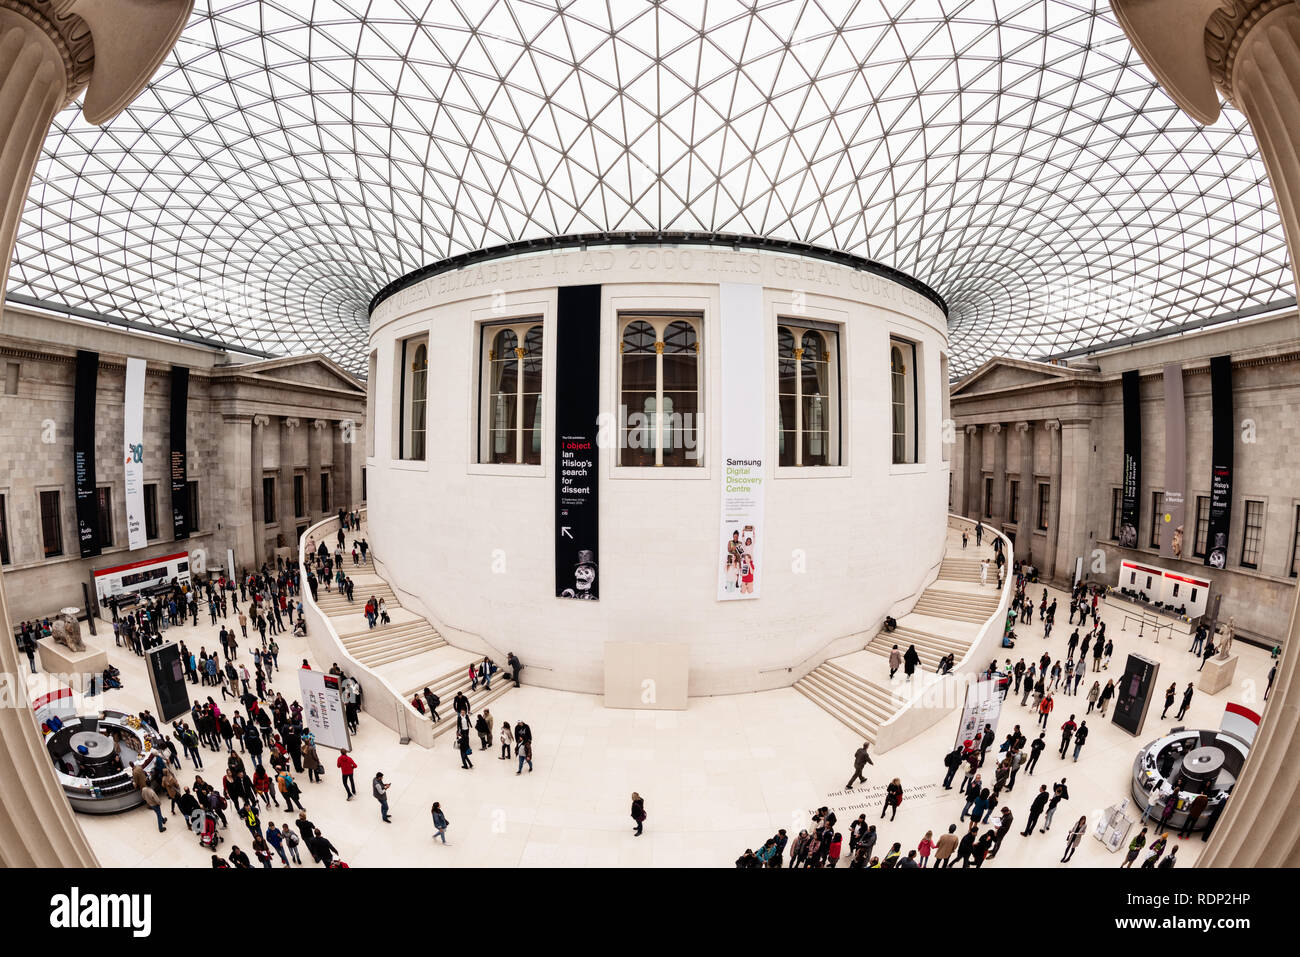 Photo taken with a Nikon 16mm f/2.8 full-frame fisheye lens on a NIKON D810 at 16mm and ƒ / 8.0. The British Museum in London houses a vast collection of world art and artifacts, reflecting human history, culture, and civilizations from around the globe. Stock Photo